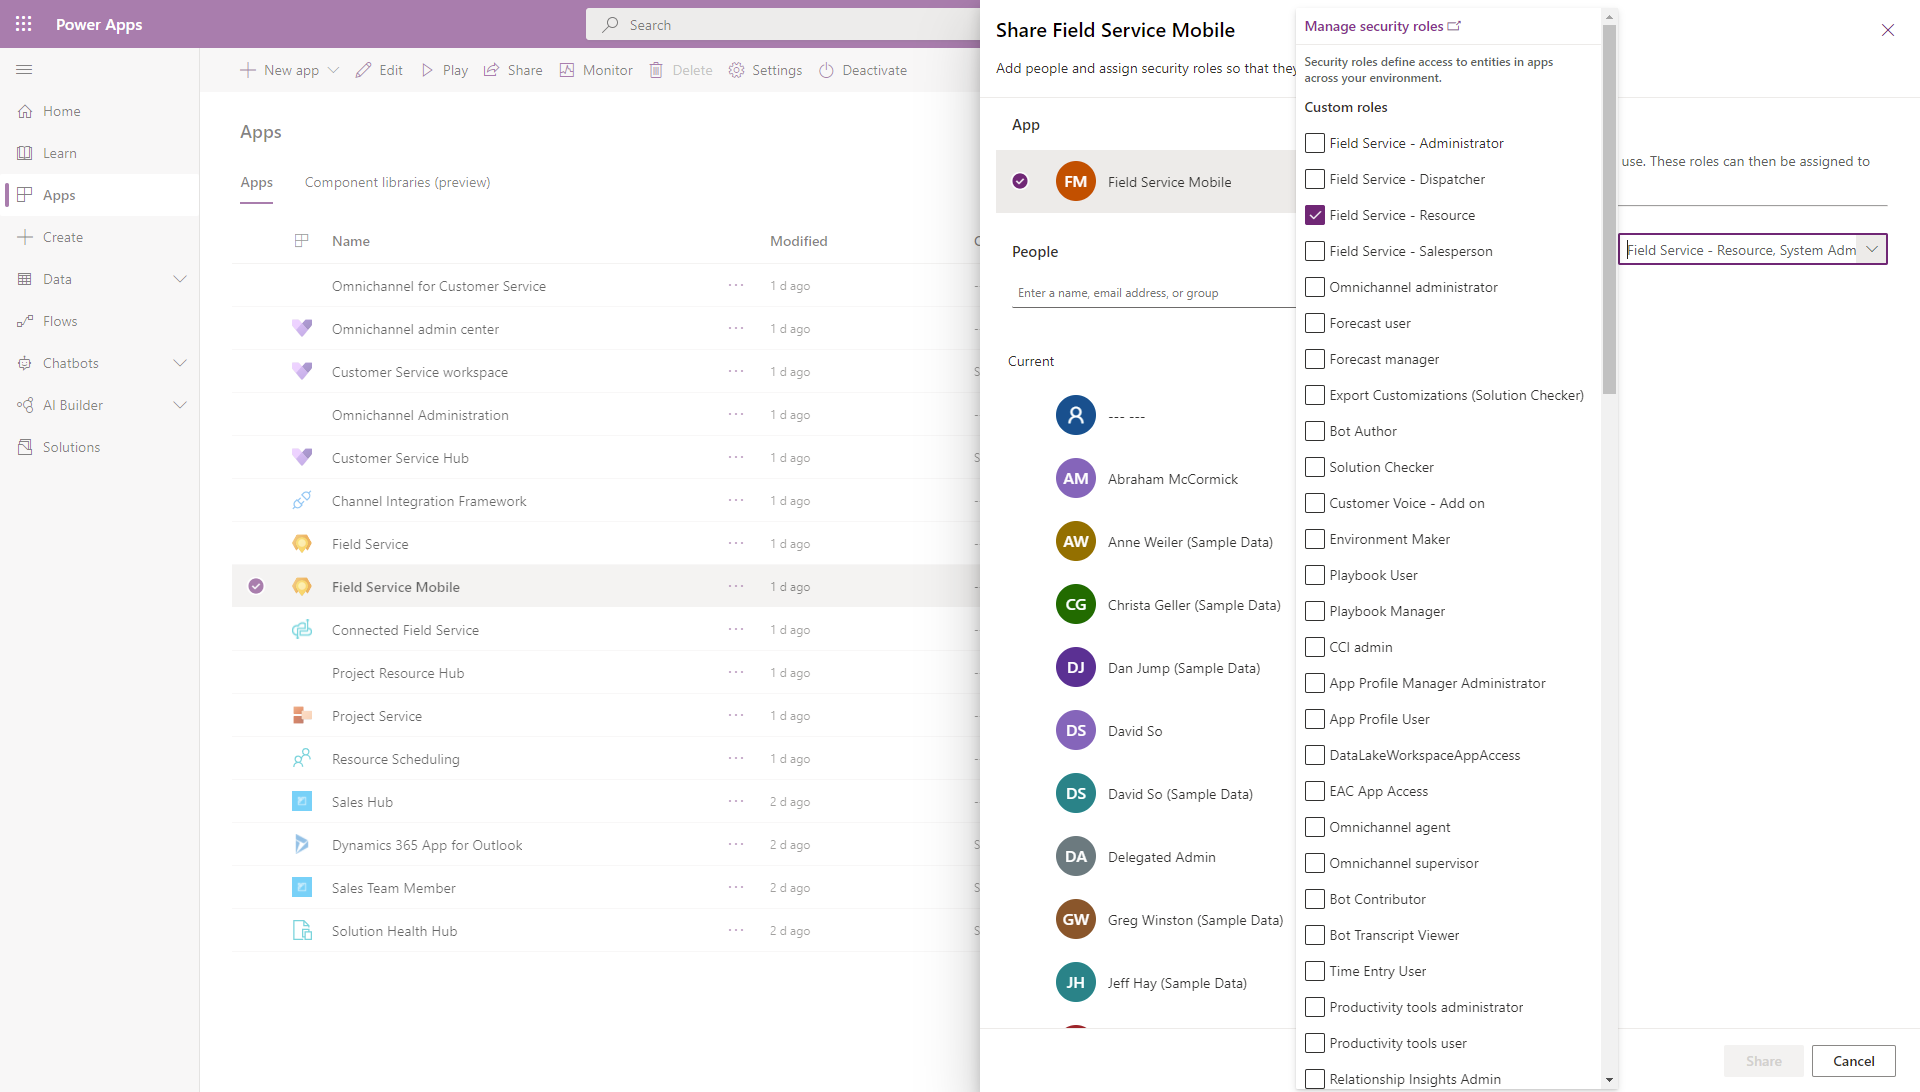 Screenshot of the Dynamics 365 list of apps, showing the Field Service Mobile solution in the list.